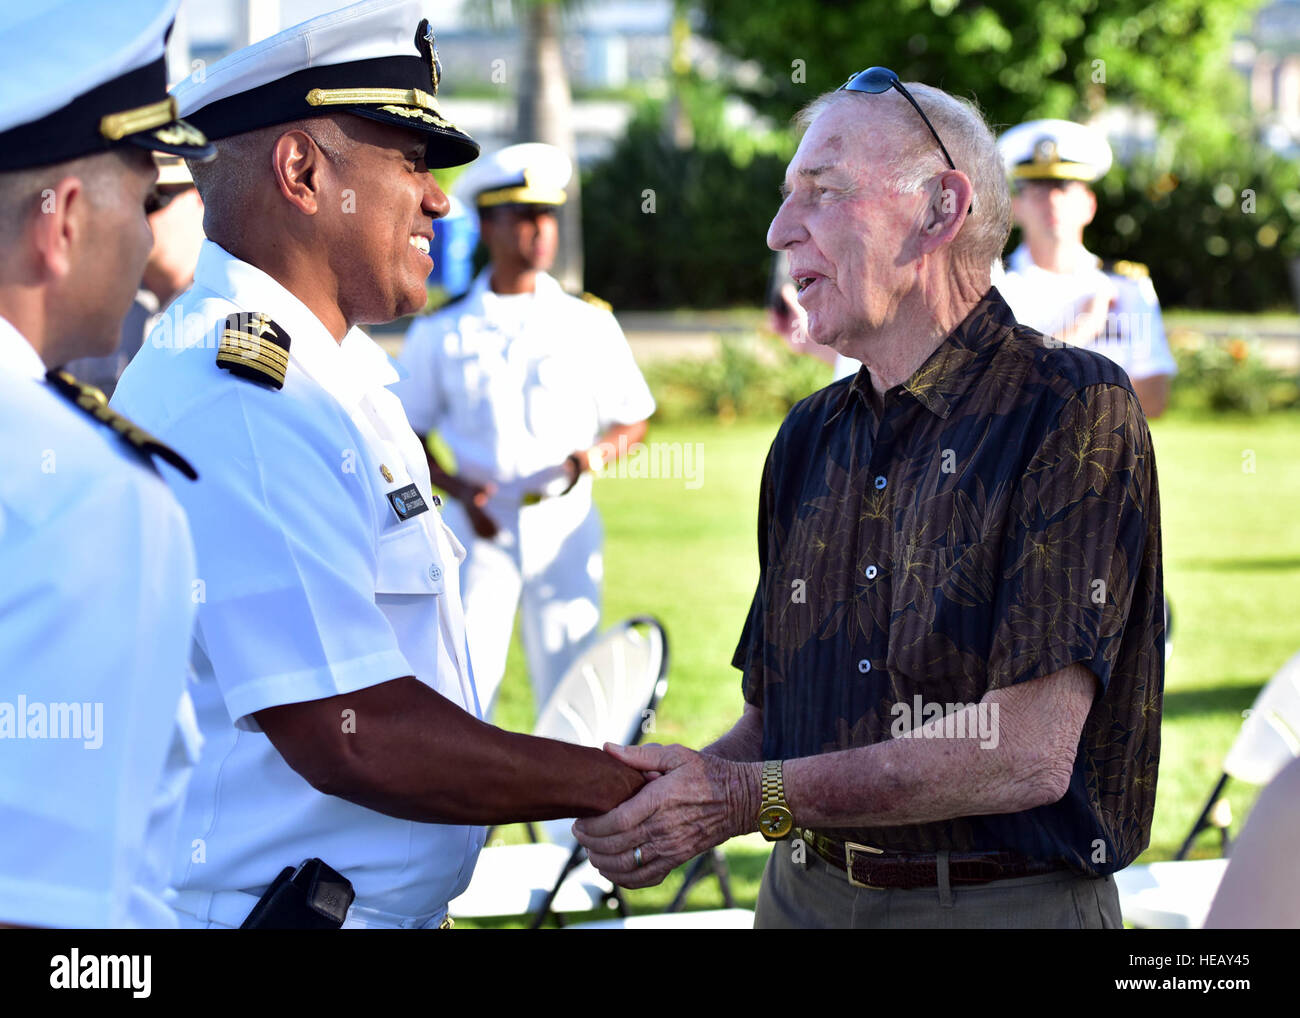 Capt. Stanley Keeve, commander of Joint Base Pearl Harbor-Hickam, and retired Navy Capt. Gerald L. Coffee, a former Vietnam War prisoner of war, exchange greetings after the Pearl Harbor Colors ceremony, held Thursday at the Pearl Harbor Visitor Center. The special ceremony paid homage to the service and sacrifices of those who were missing in action (MIA) and prisoners of war (POW). The Pearl Harbor Colors ceremony highlights a different theme of military heritage every month.  Senior Airman Christopher Stoltz) Stock Photo